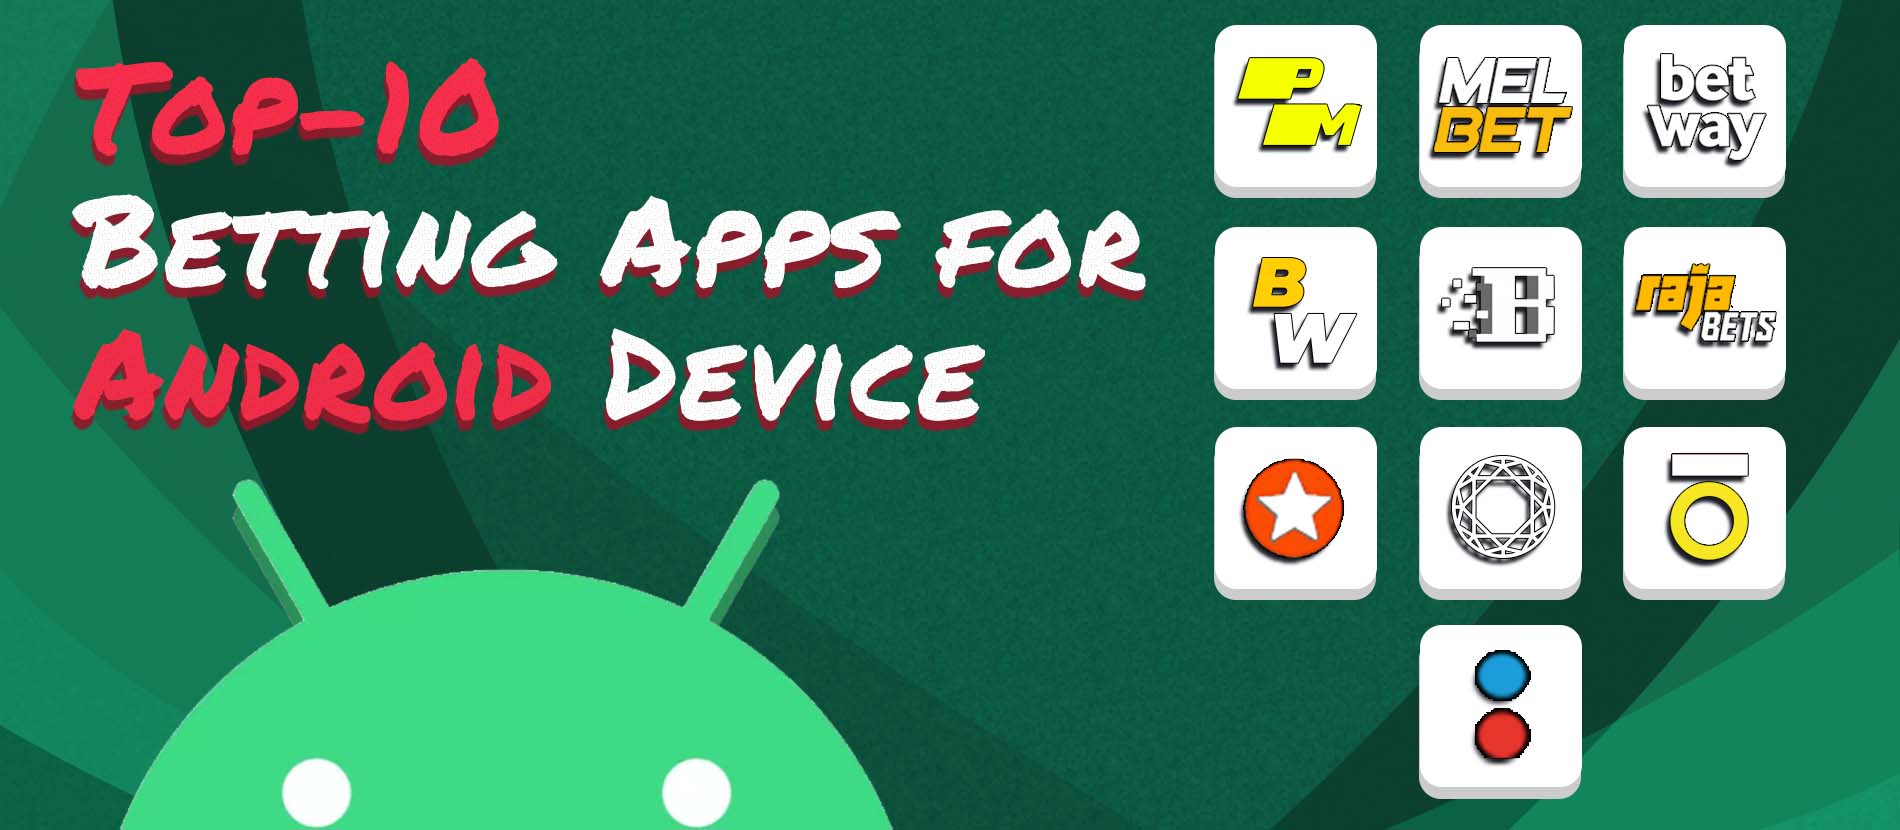 top 10 android apps for bangladesh players.